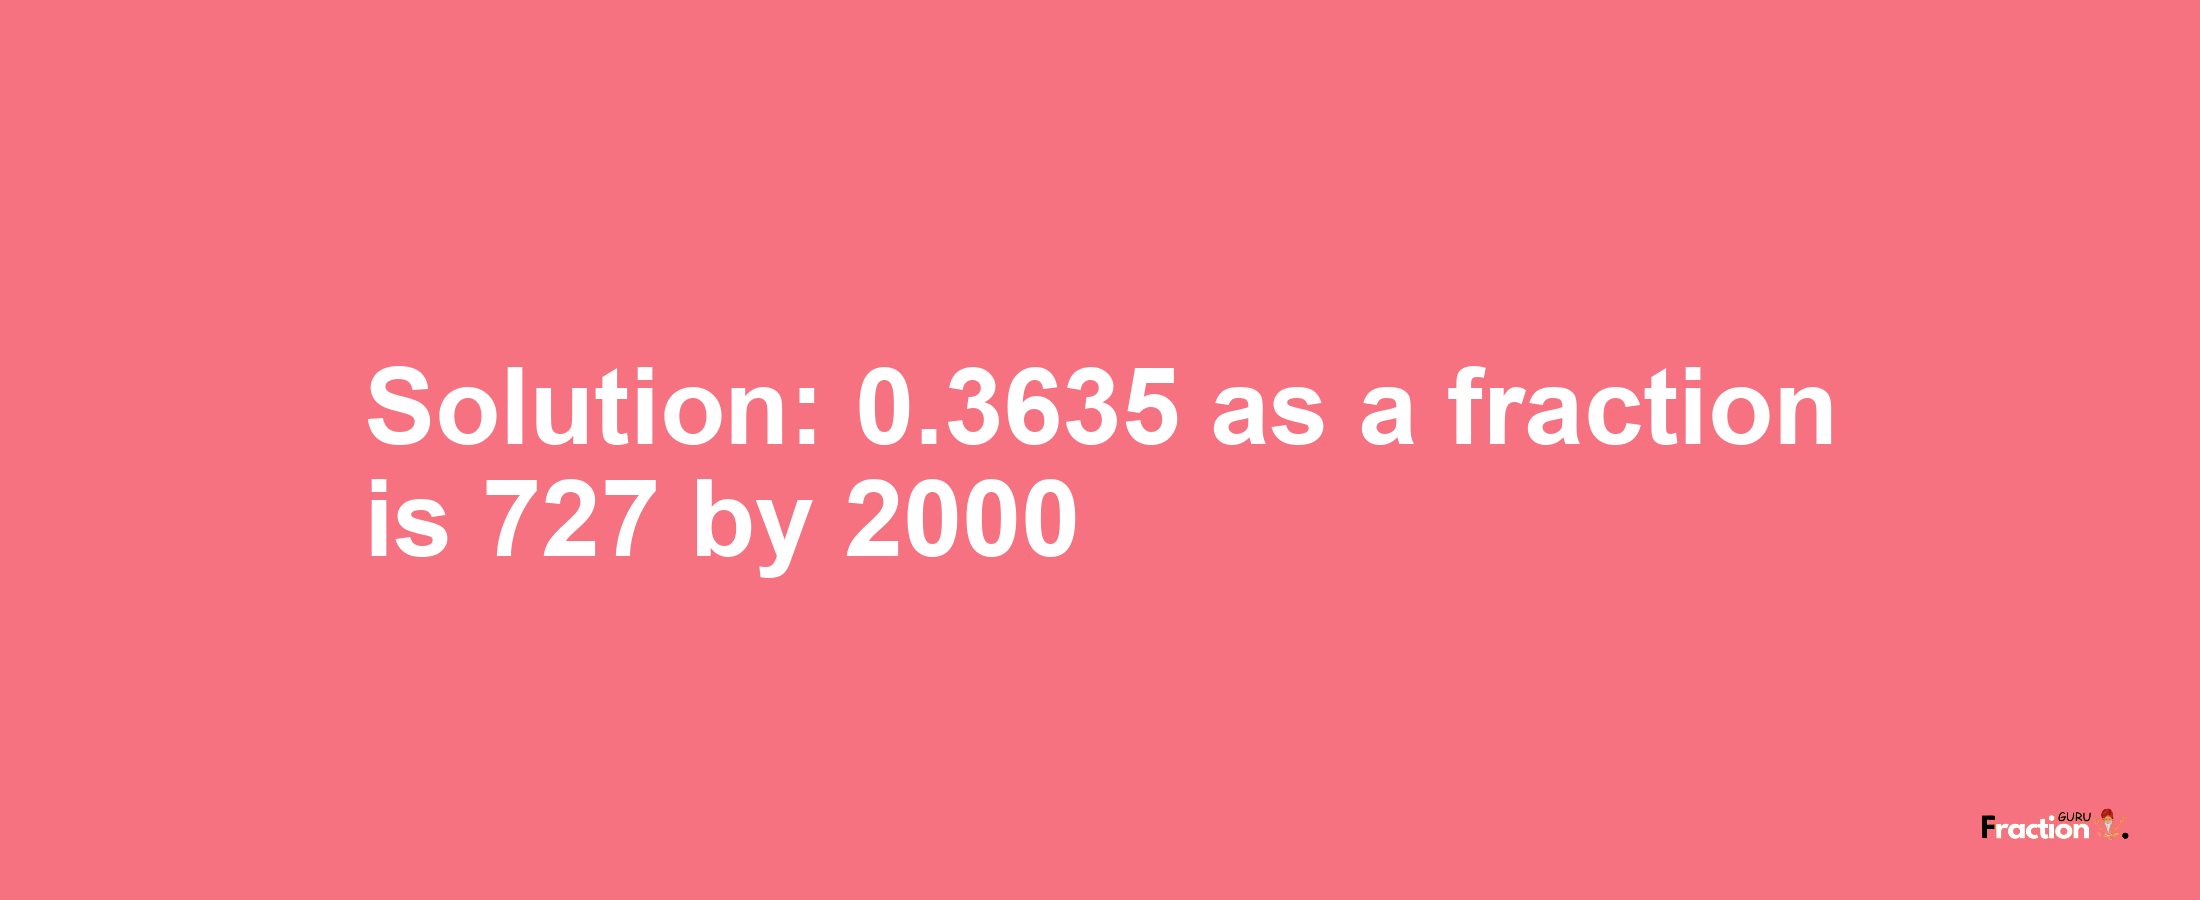 Solution:0.3635 as a fraction is 727/2000